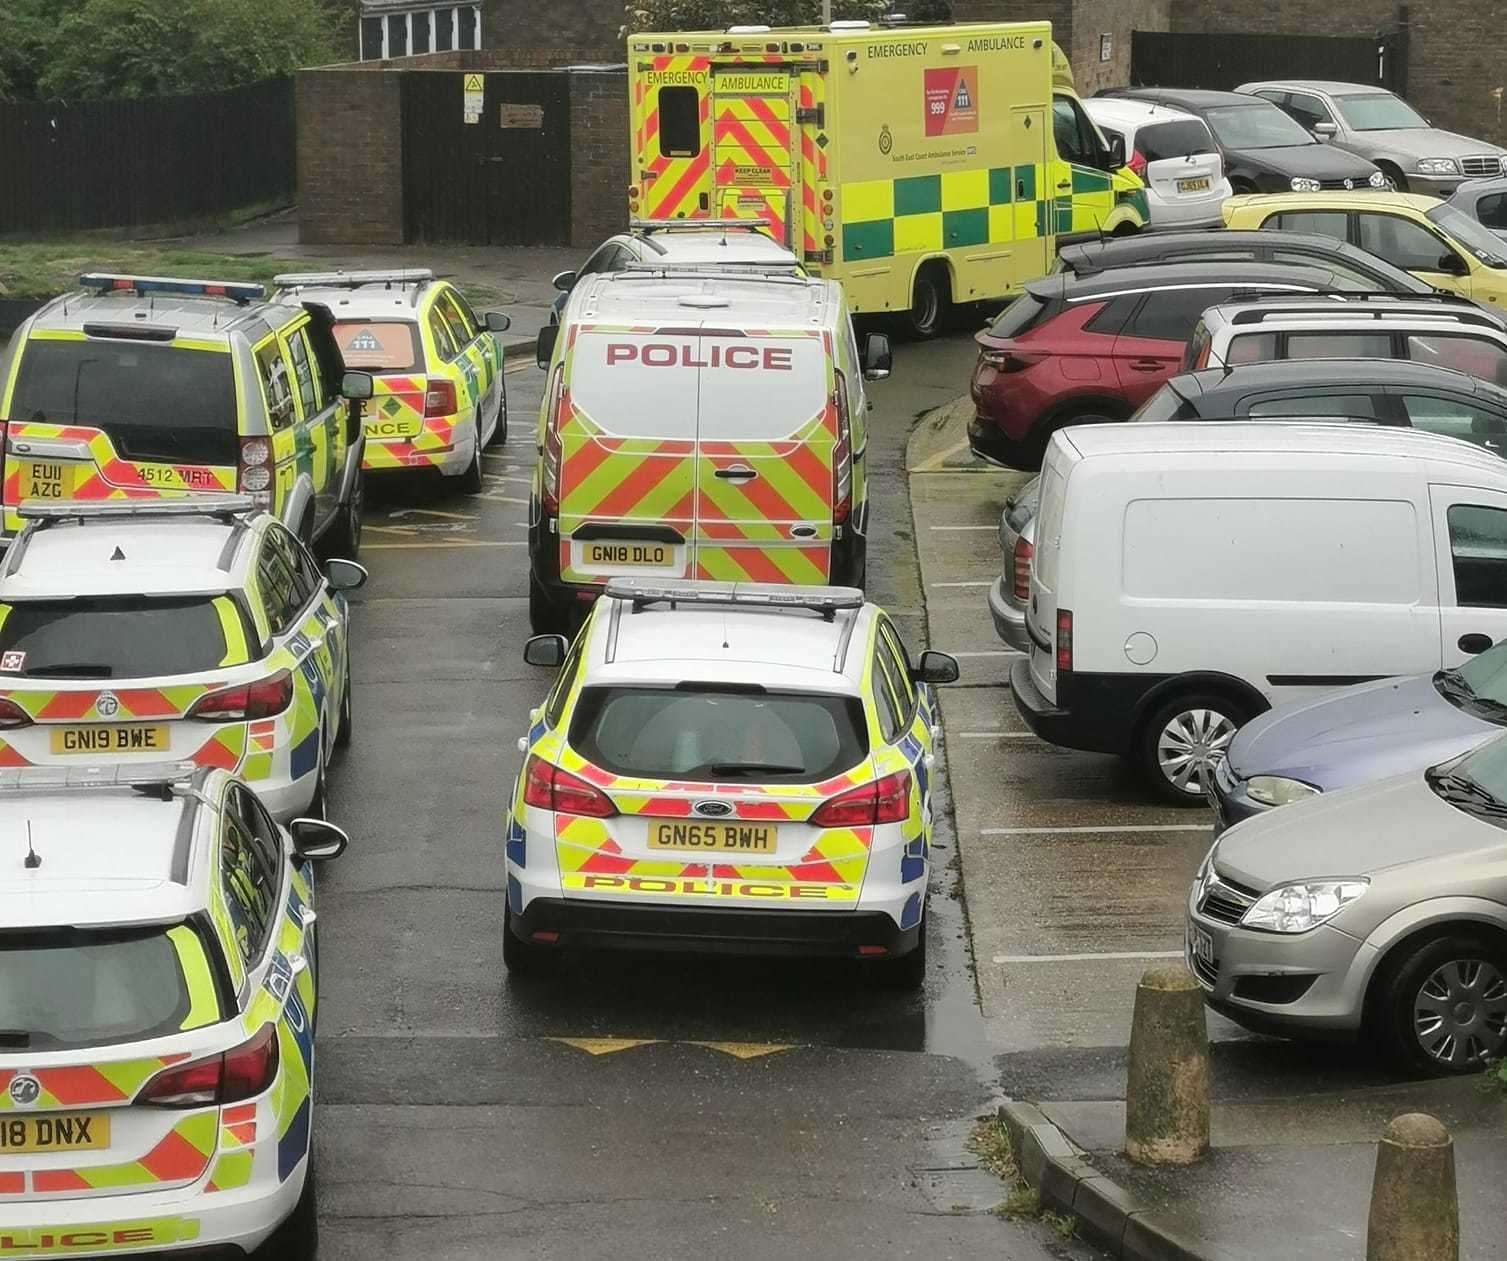 Pictures shared online show as many as eight emergency service vehicles outside the tower block